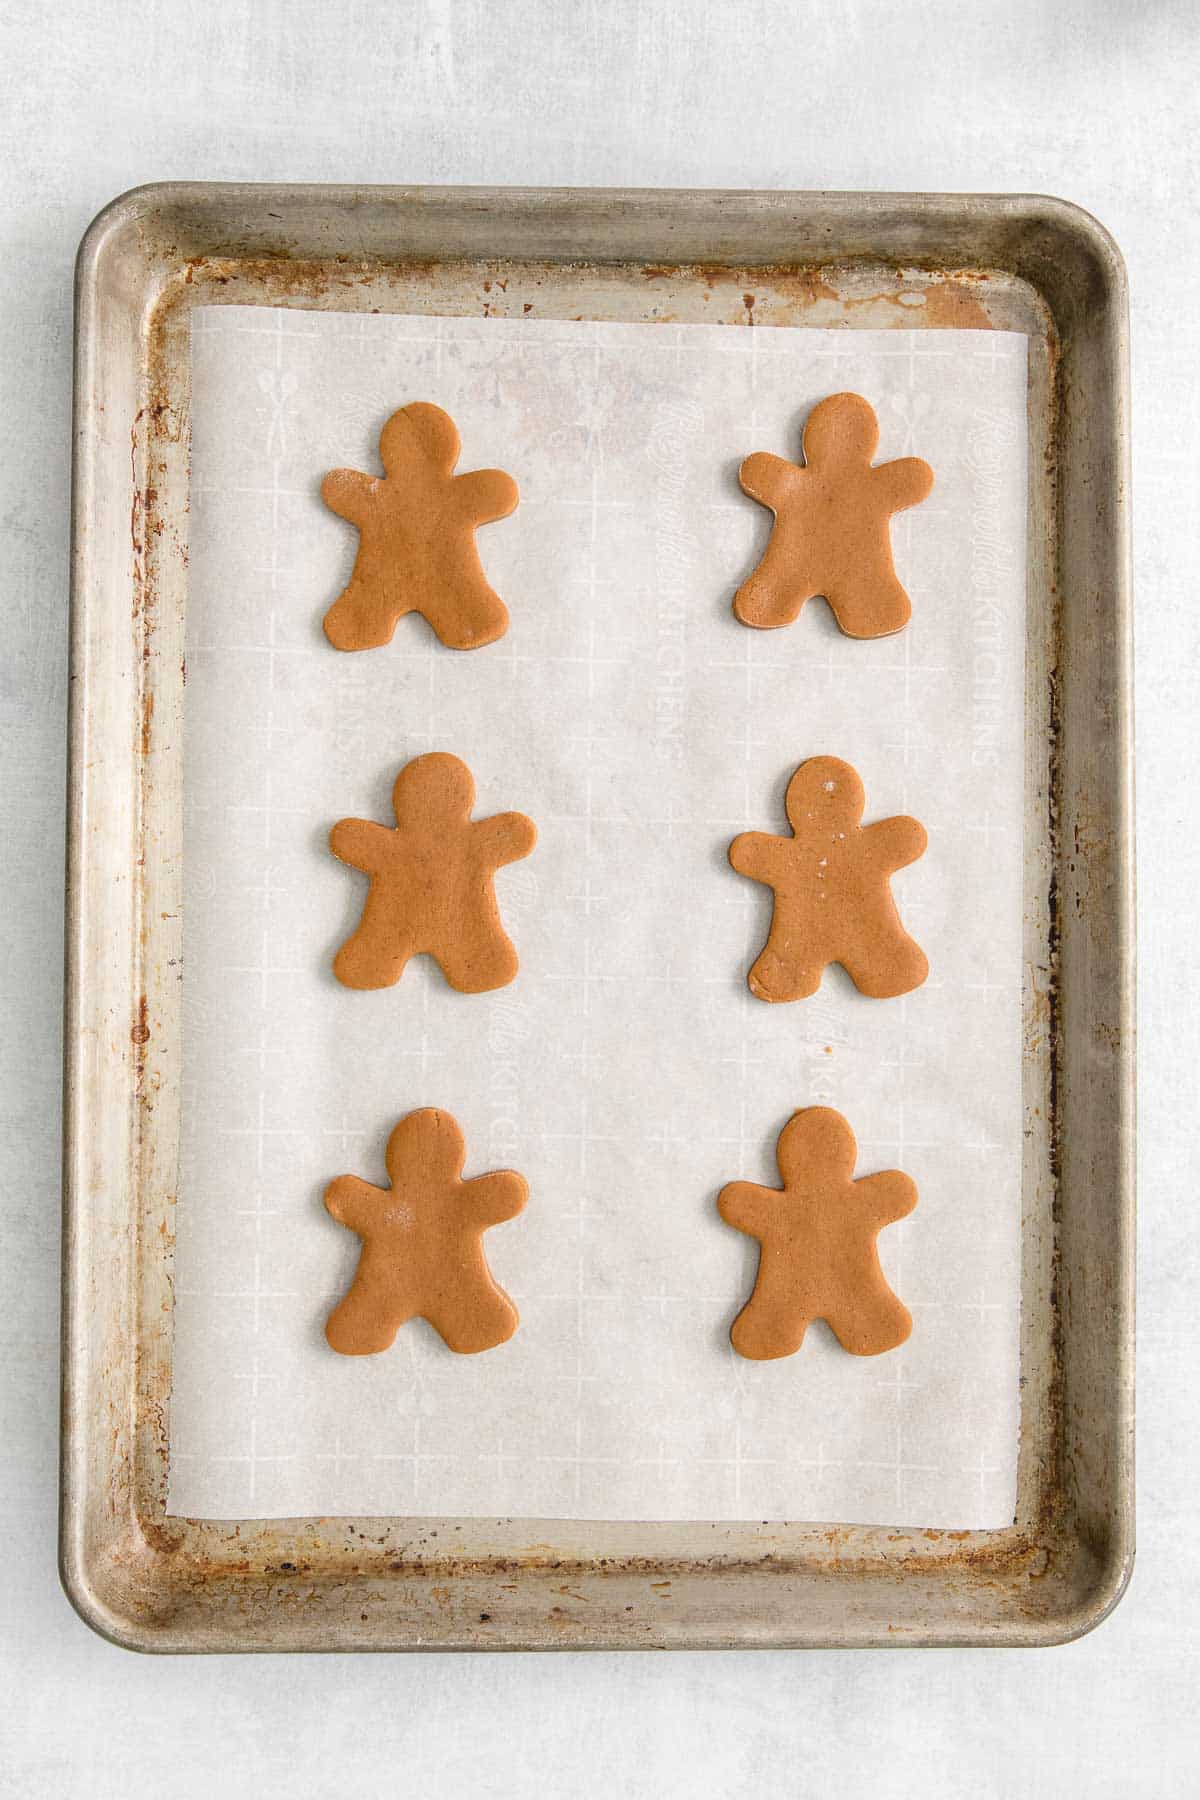 cookie sheet with raw gingerbread men cookies.